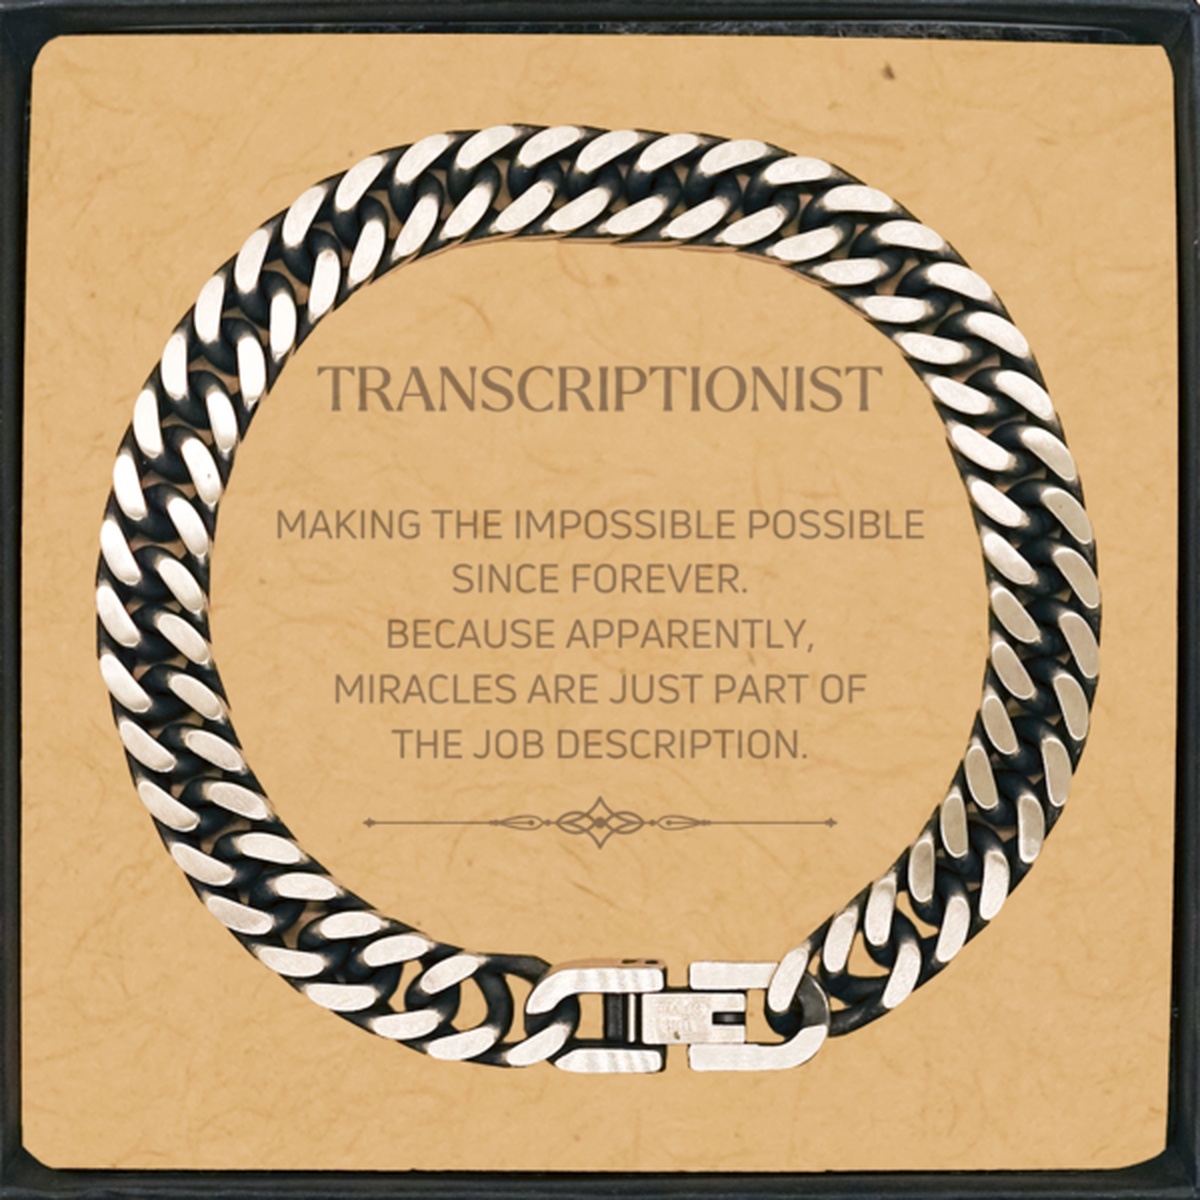 Funny Transcriptionist Gifts, Miracles are just part of the job description, Inspirational Birthday Cuban Link Chain Bracelet For Transcriptionist, Men, Women, Coworkers, Friends, Boss